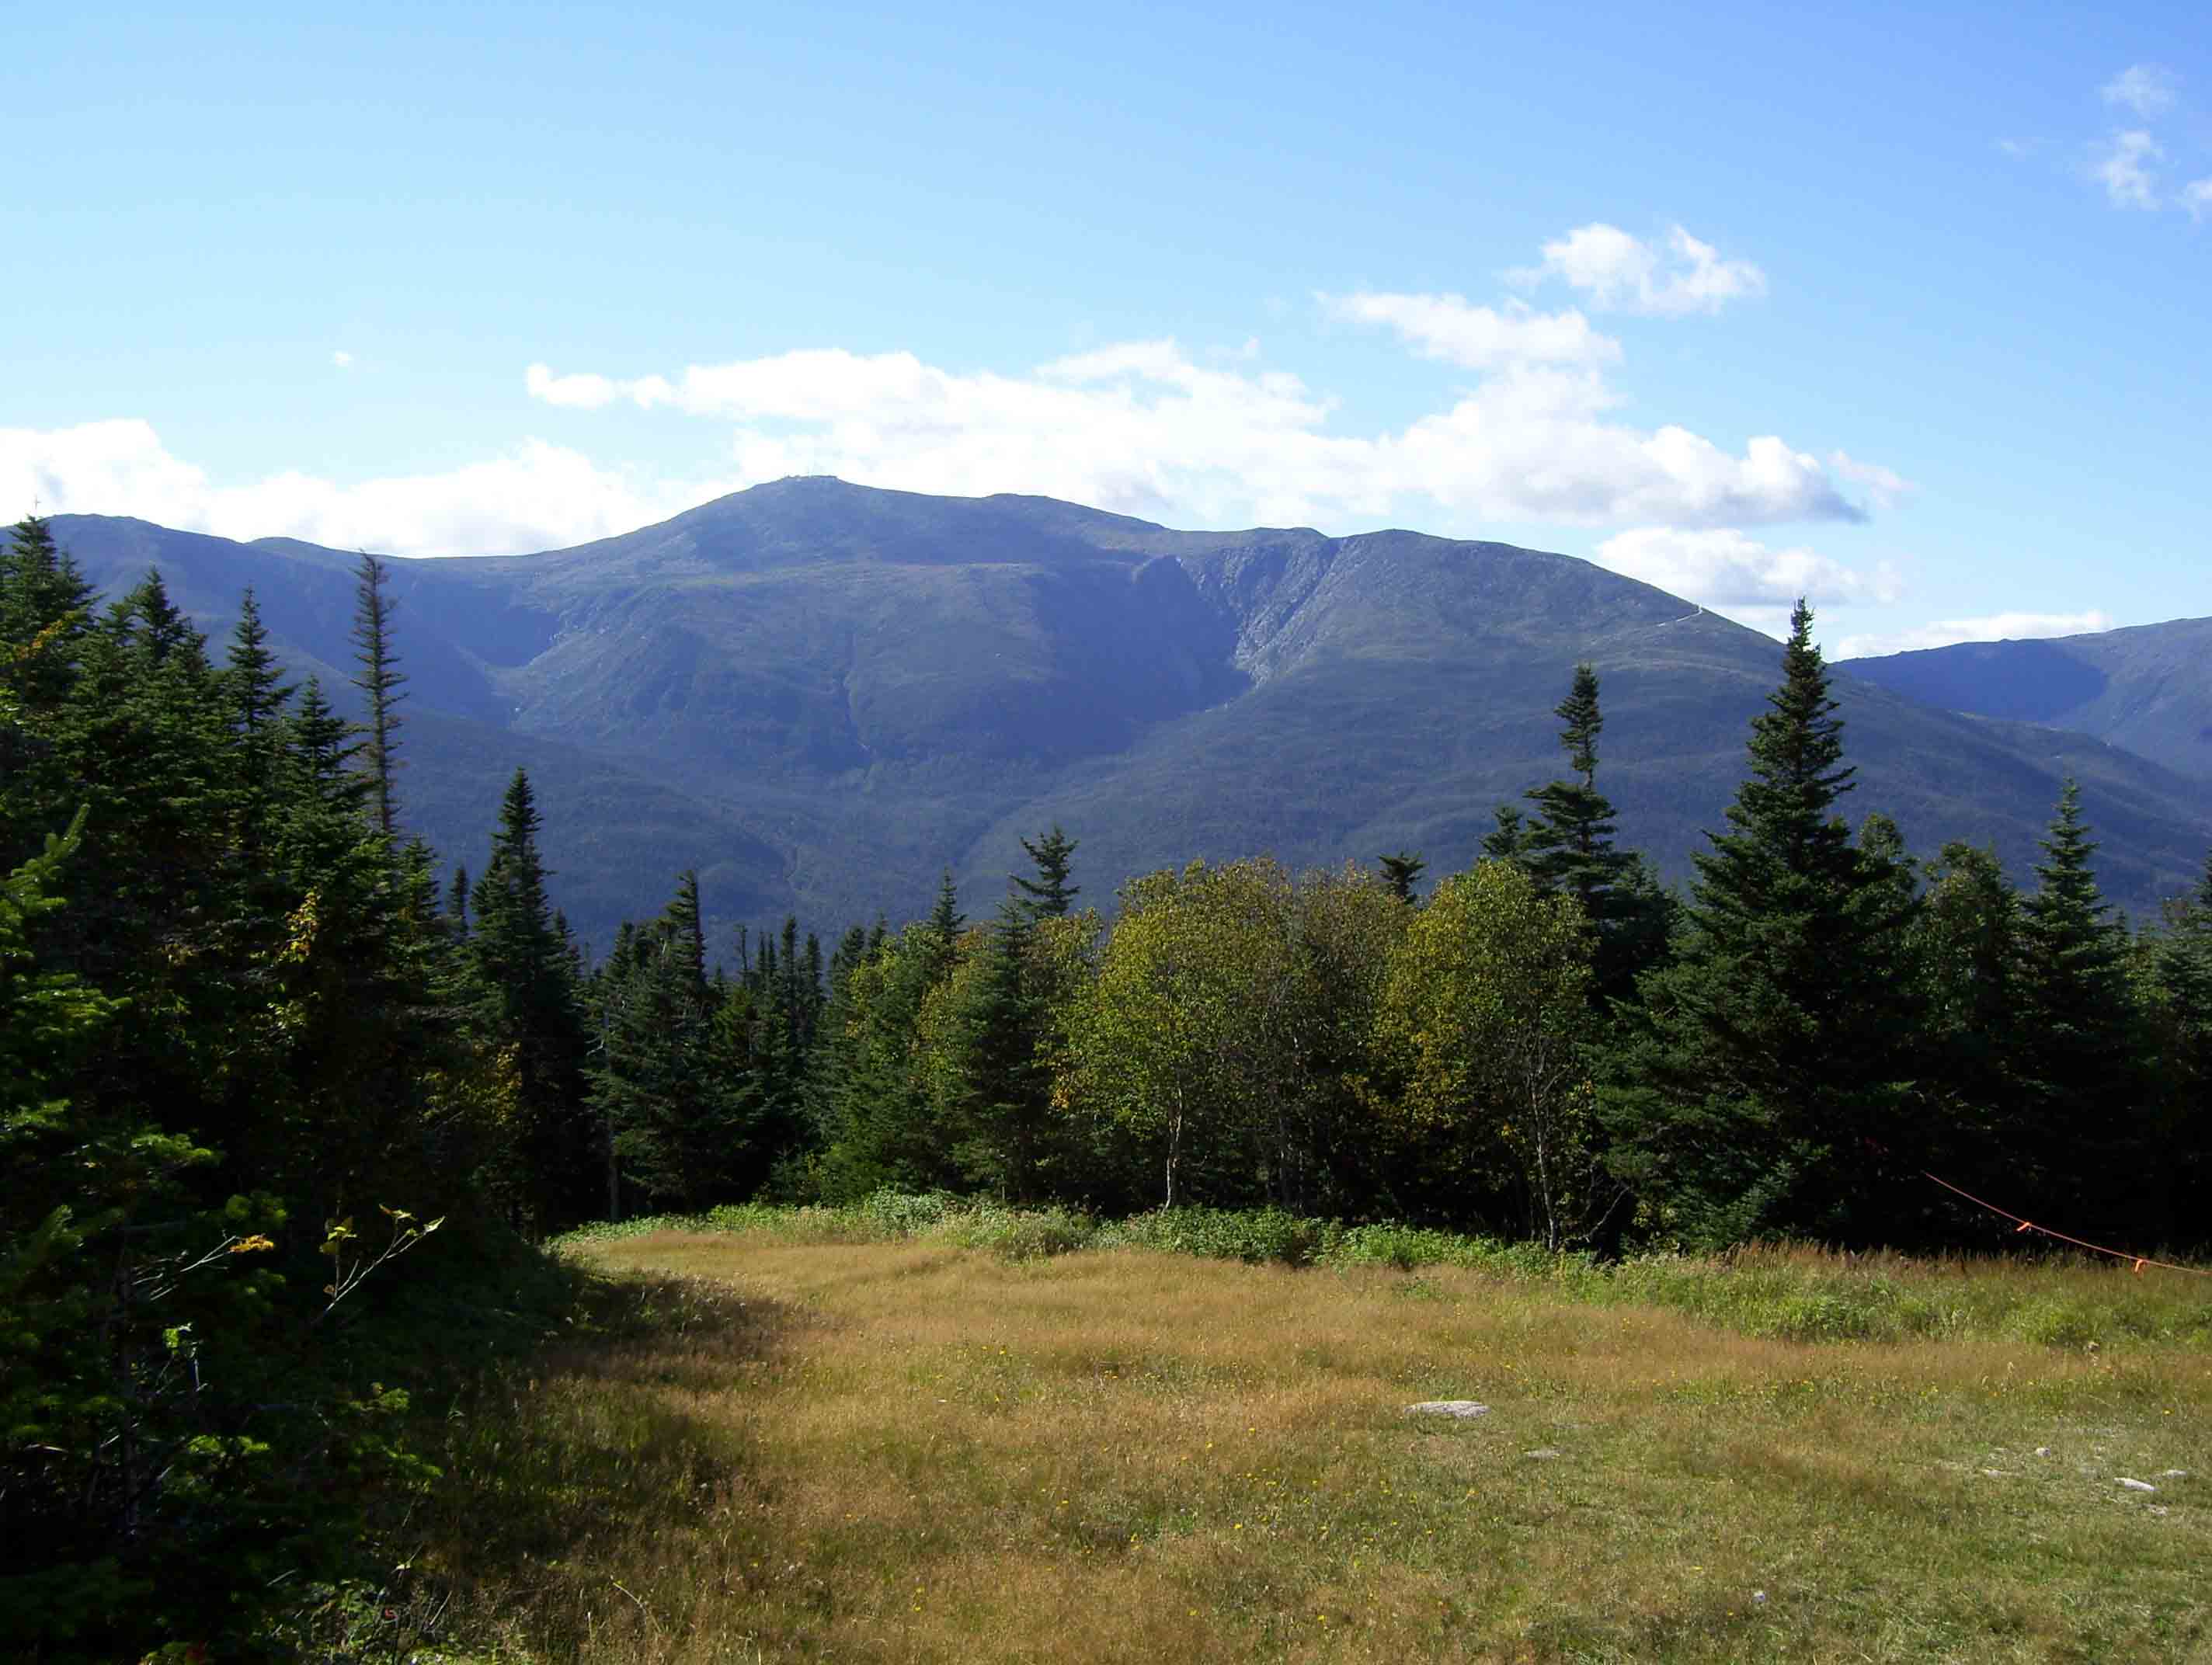 mm 18.2 - Another view of Mt. Washington (taken 9/1/07) from near the top of the Wildcat Mt. gondola ski lift.  Courtesy dlcul@conncoll.edu